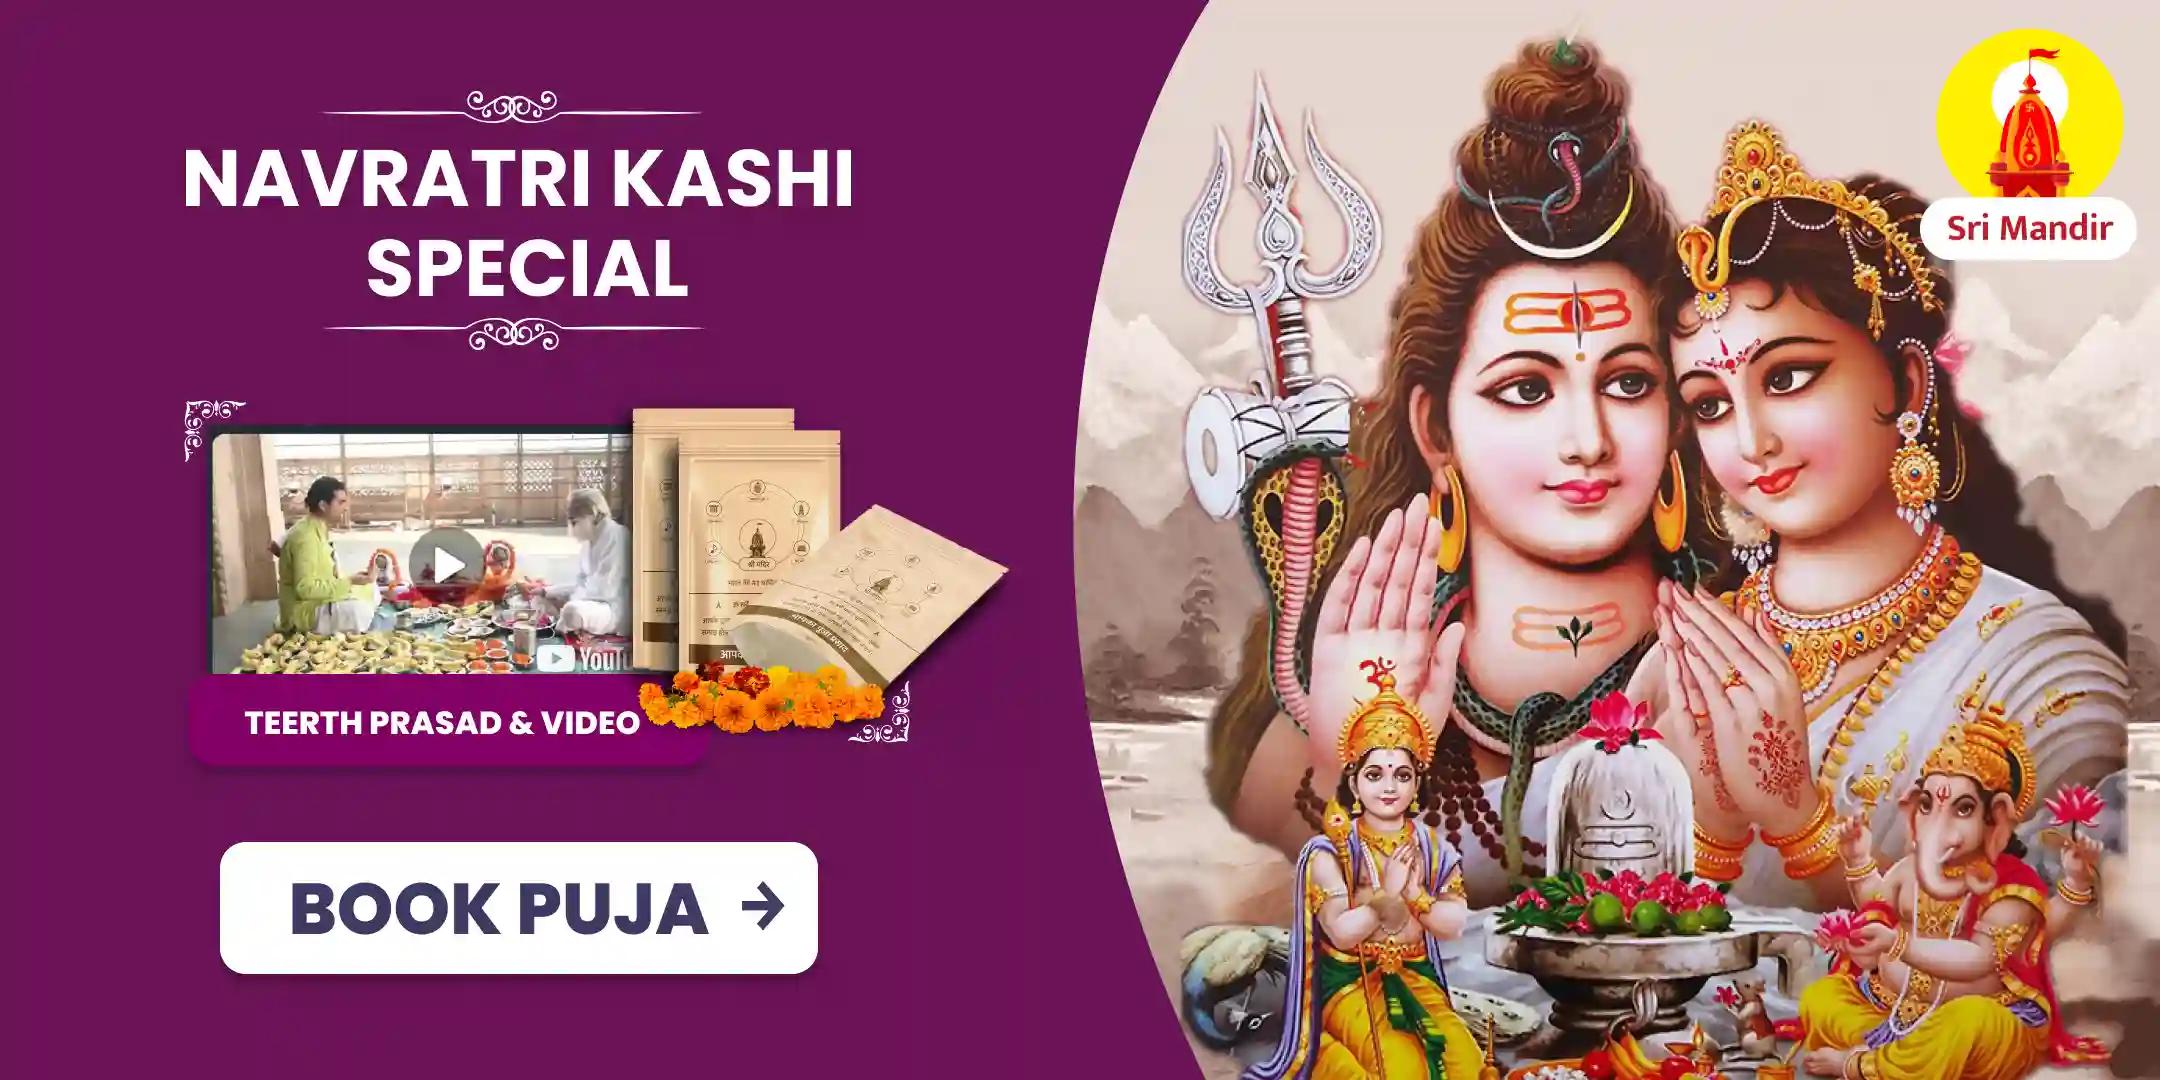 Navratri Kashi Special Gauri-Shankar Puja and Shiv-Gauri Stotra Path To Resolve Conflicts and Achieve Bliss in Relationship